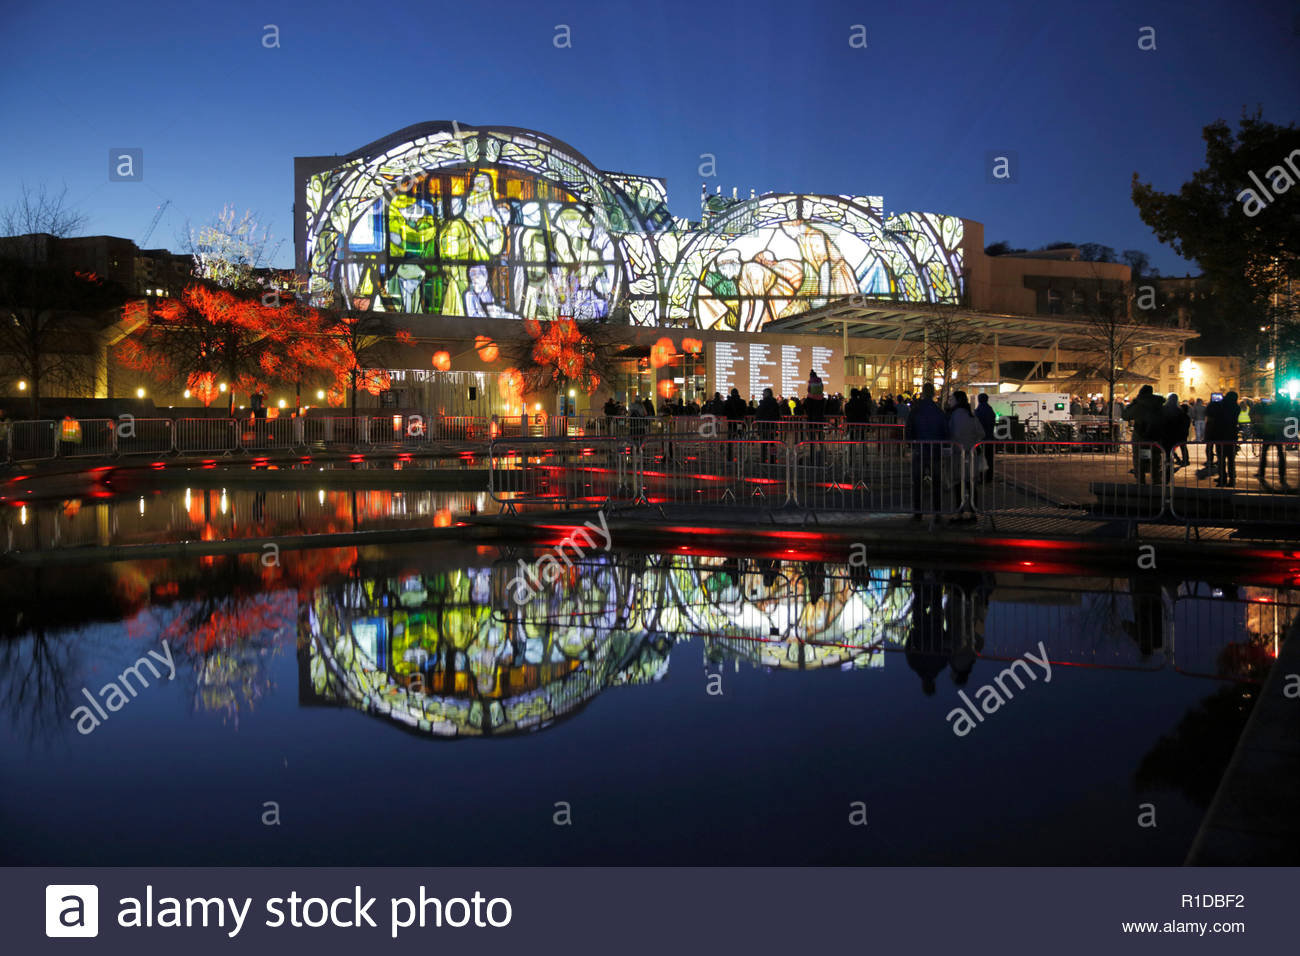 Edinburgh, United Kingdom. 11th November, 2018.  The Scottish Parliament building illuminated on Armistice day with images that tell the story of the world war 1 conflict alongside a Roll of Honour of those who died, reflected in the ornamental pond.   Credit: Craig Brown/Alamy Live News. Stock Photo